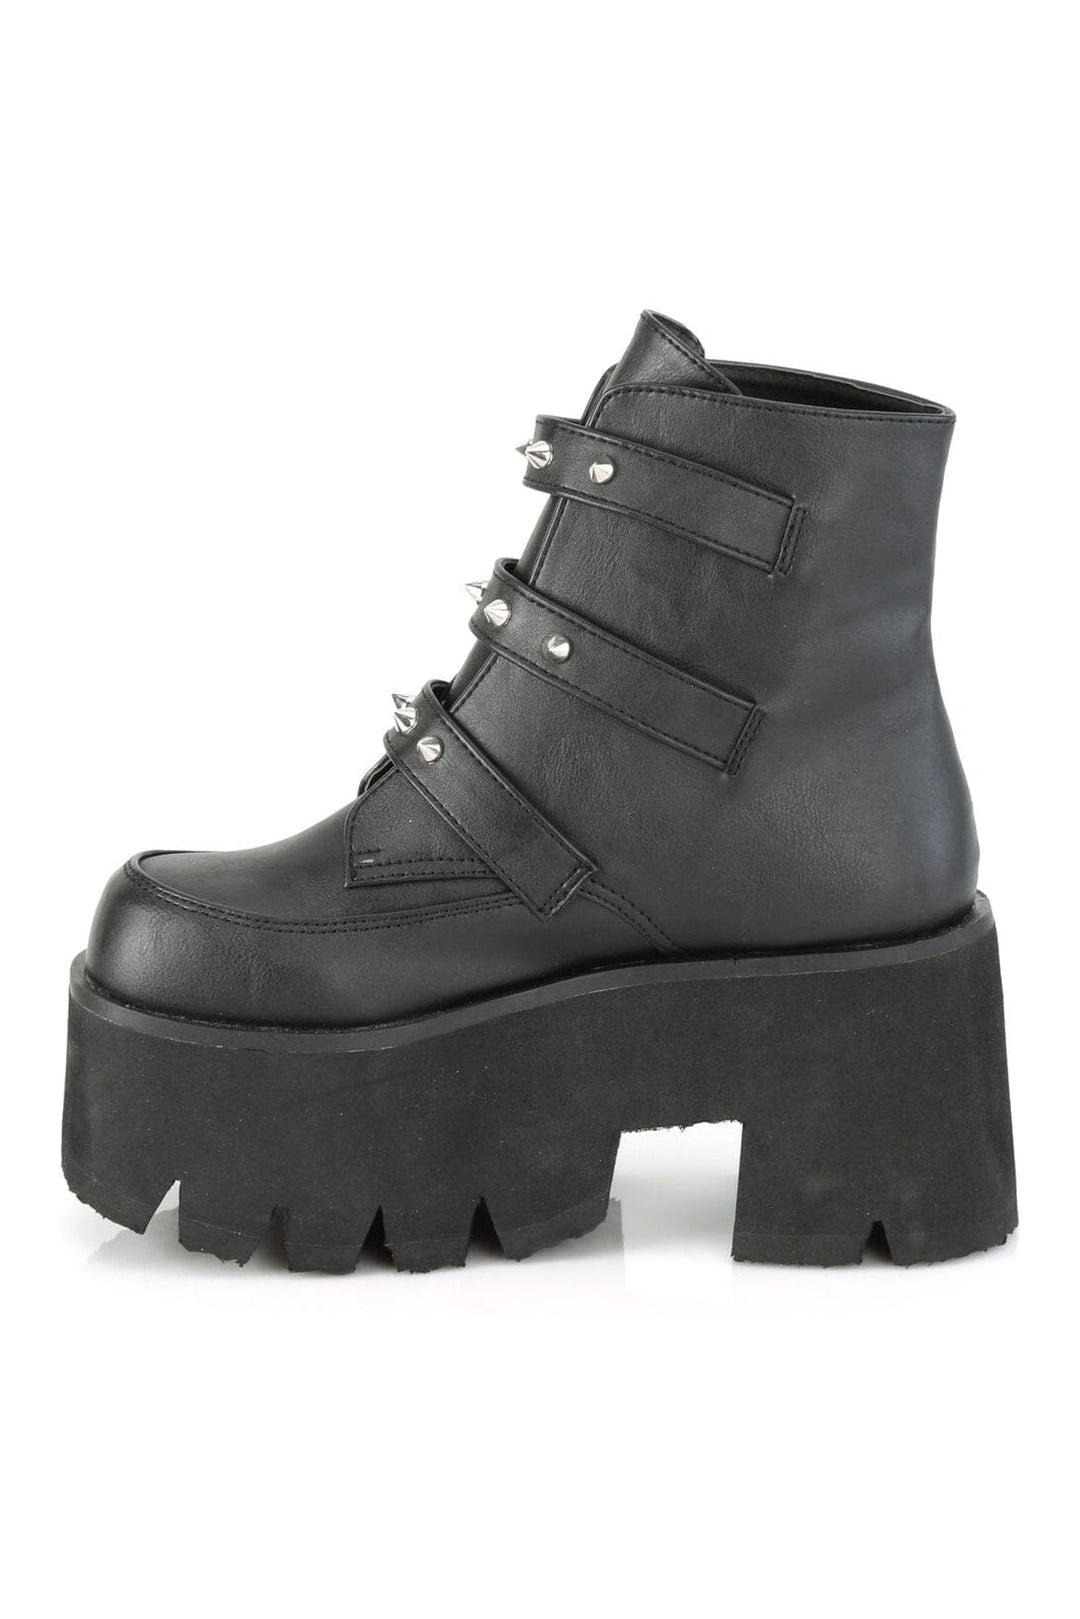 ASHES-55 Black Vegan Leather Ankle Boot-Ankle Boots-Demonia-SEXYSHOES.COM